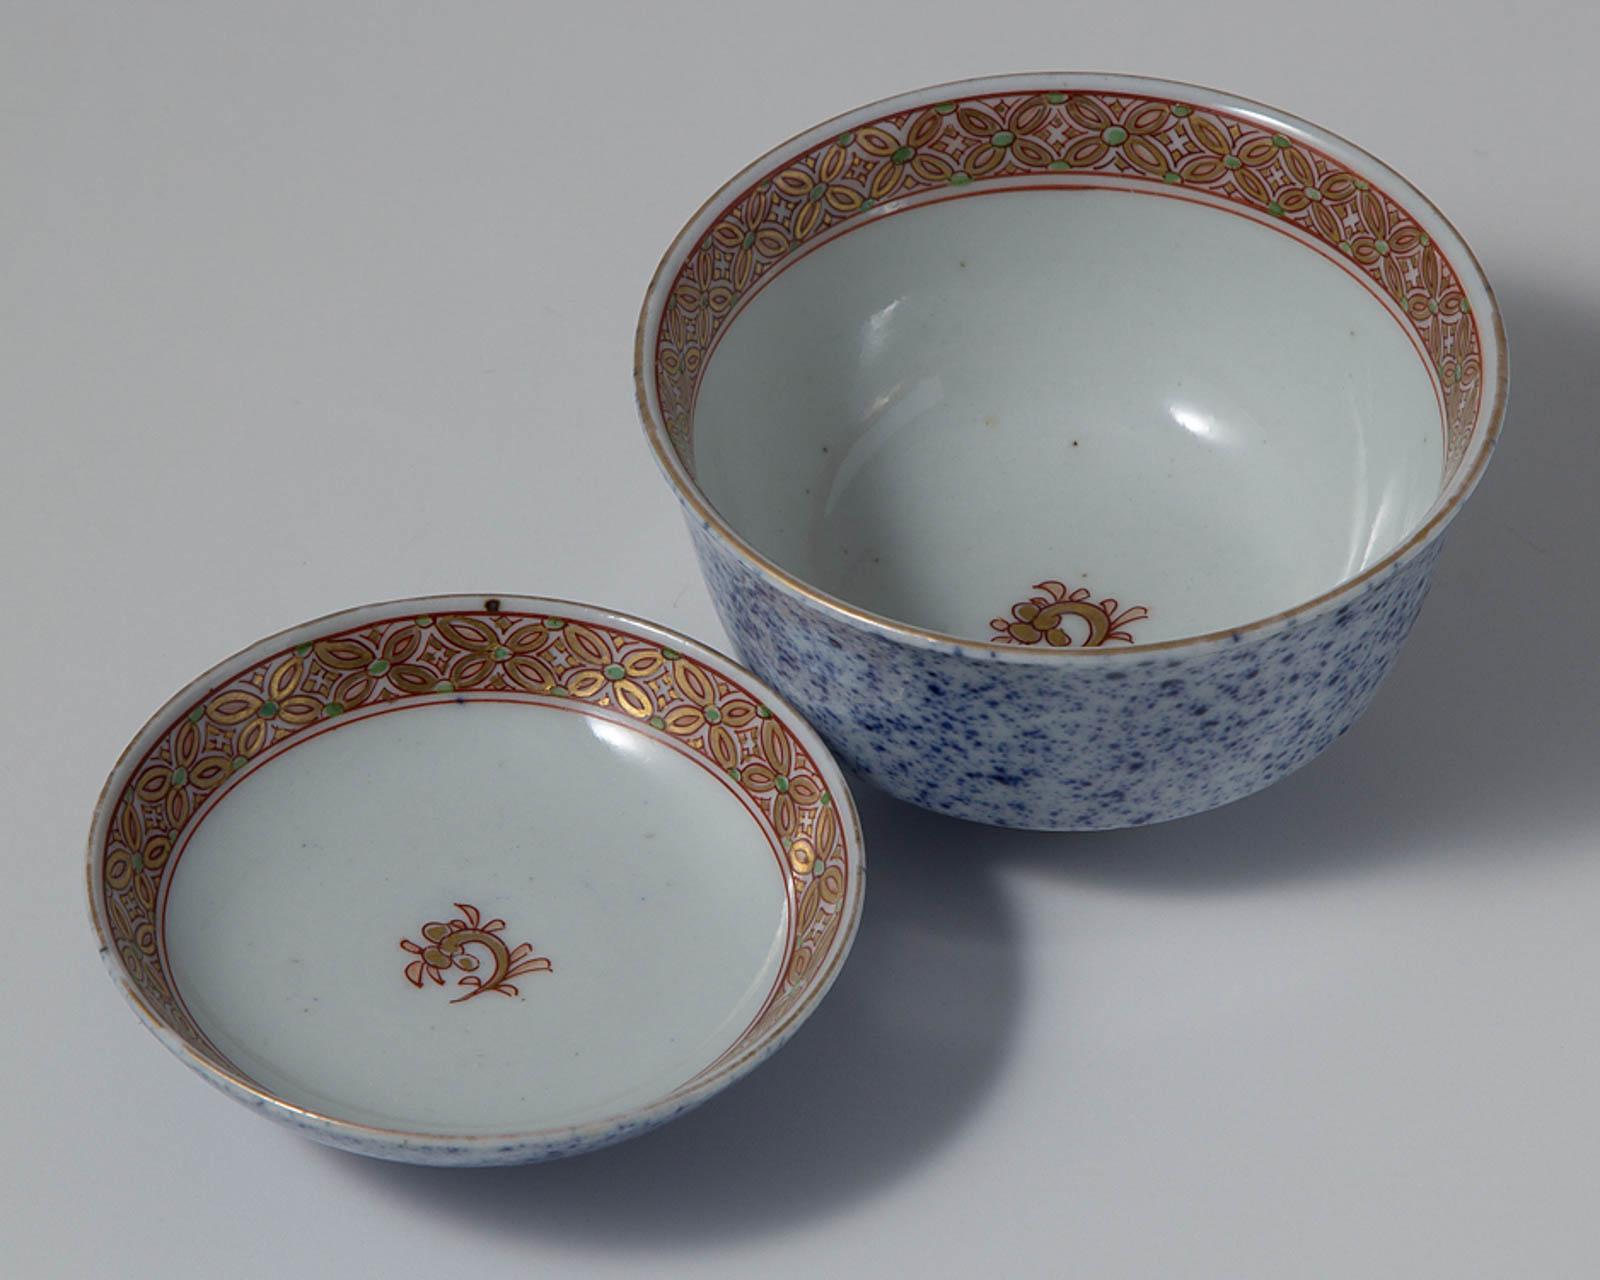 Antique 19th Century Eggshell Saucer Fabulous Quality Japanese Porcelain, Japan In Excellent Condition For Sale In Amsterdam, Noord Holland